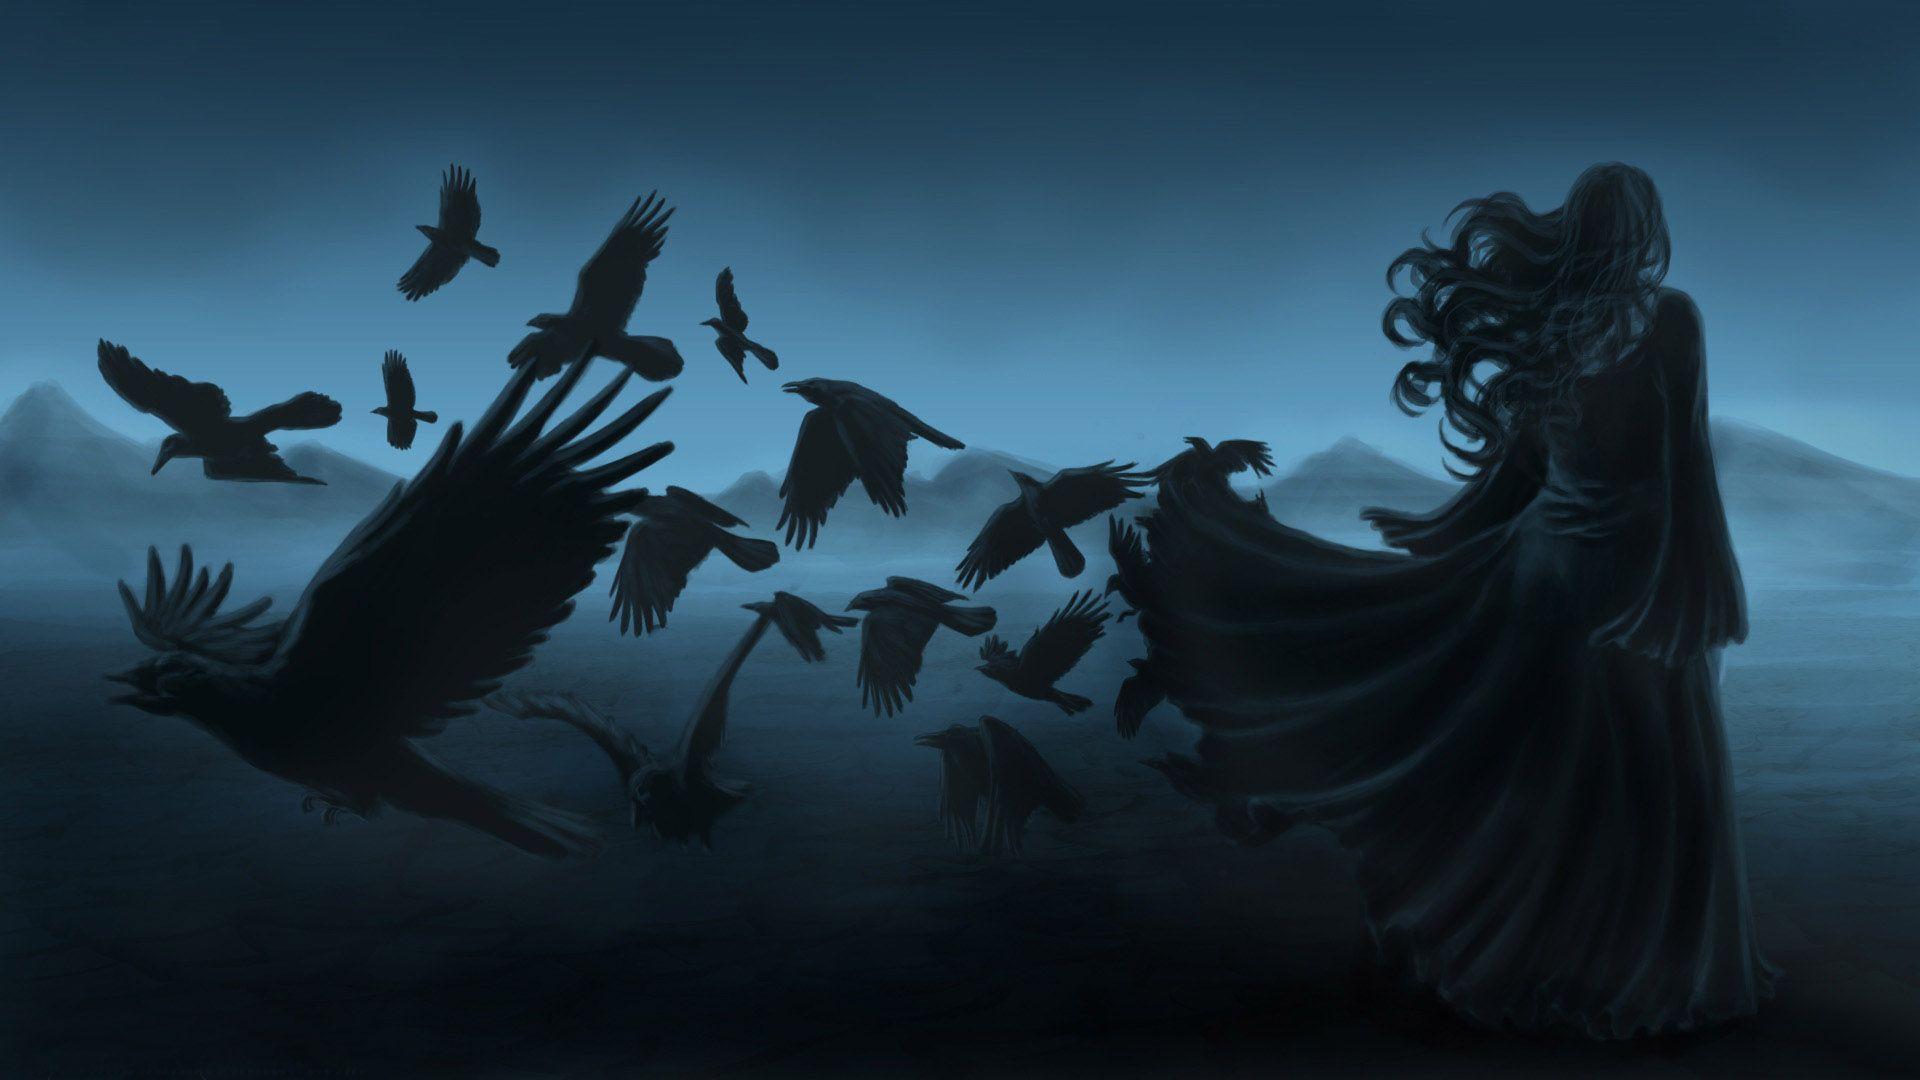 Beautiful HQFX Wallpaper's Collection: Crow Wallpaper (46) of Crow